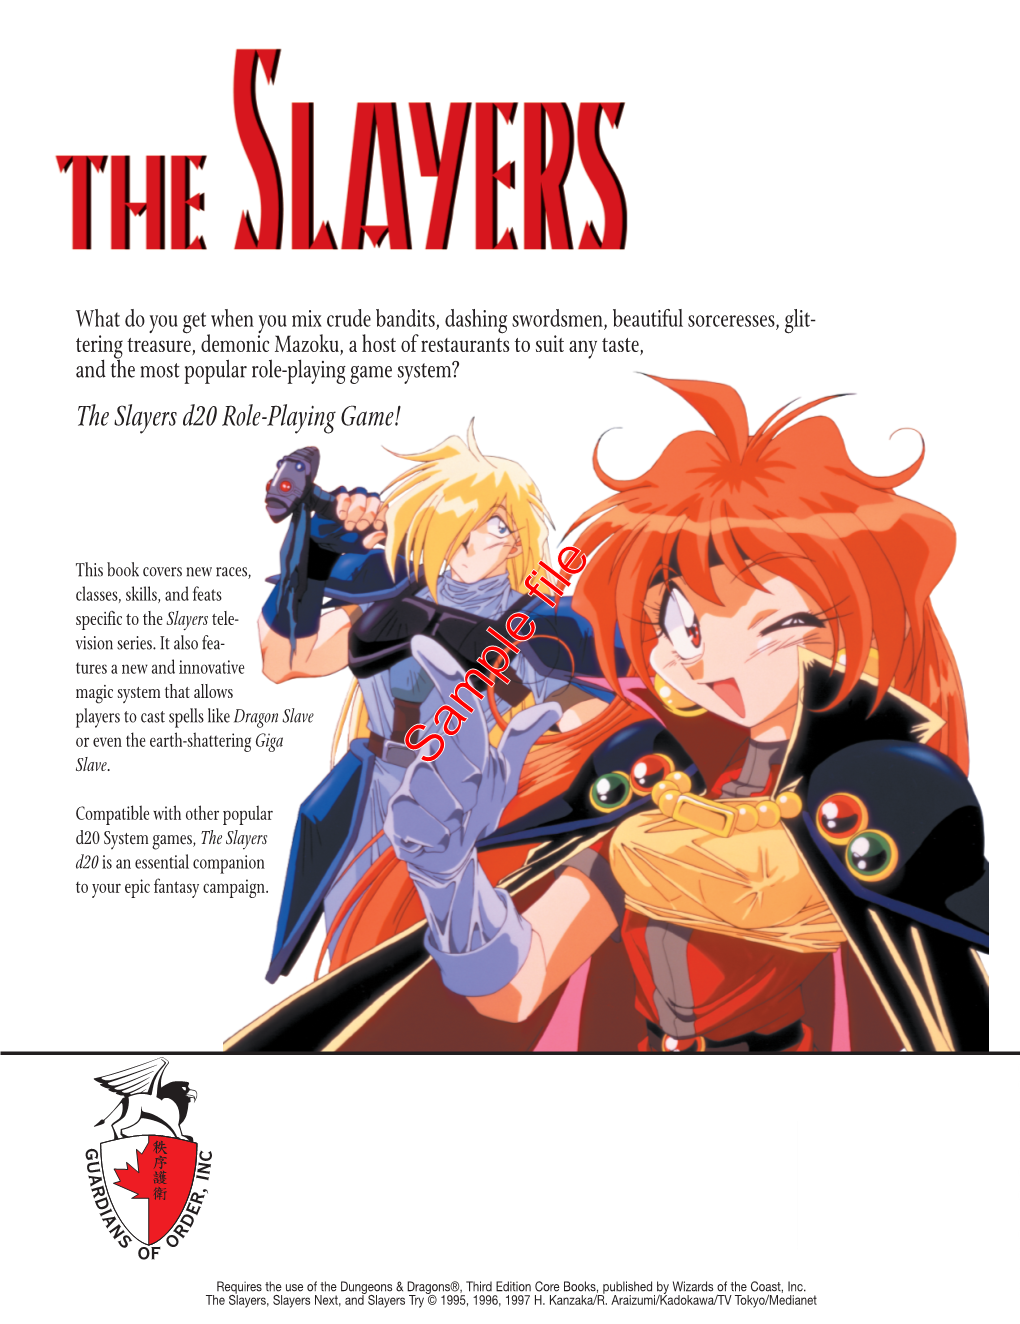 The Slayers D20 Role-Playing Game!